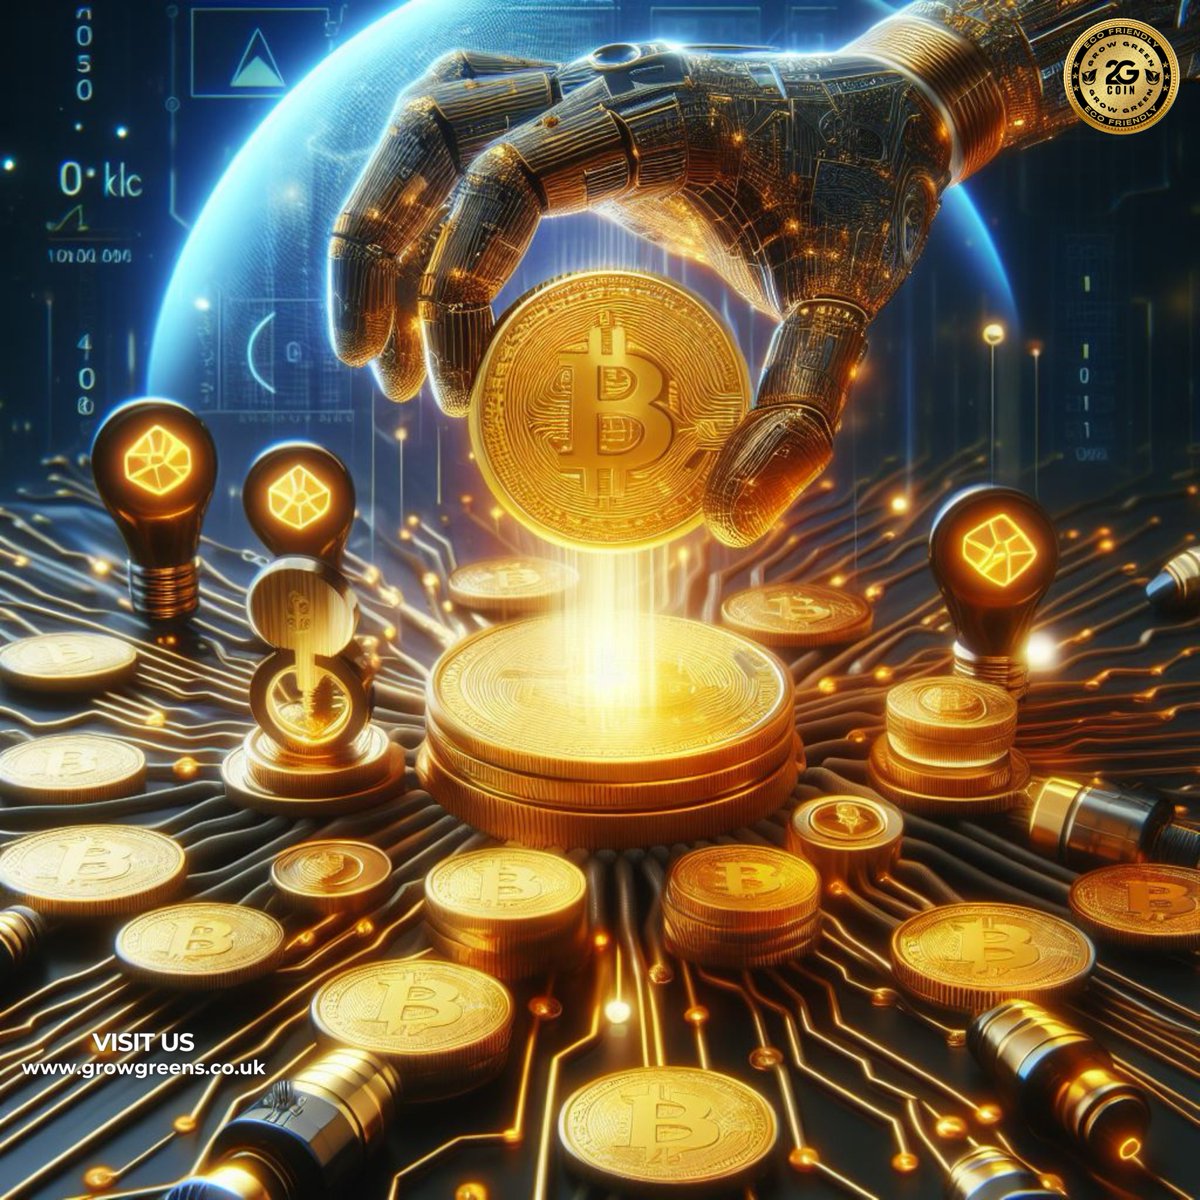 Ready to take your portfolio to new heights? Look no further than 2G Bitcoin! As the world's first decentralized digital currency, Bitcoin is revolutionizing the financial landscape. 
 #BitcoinInvestment #GrowGreen #FinancialFreedom #GreenInvestment